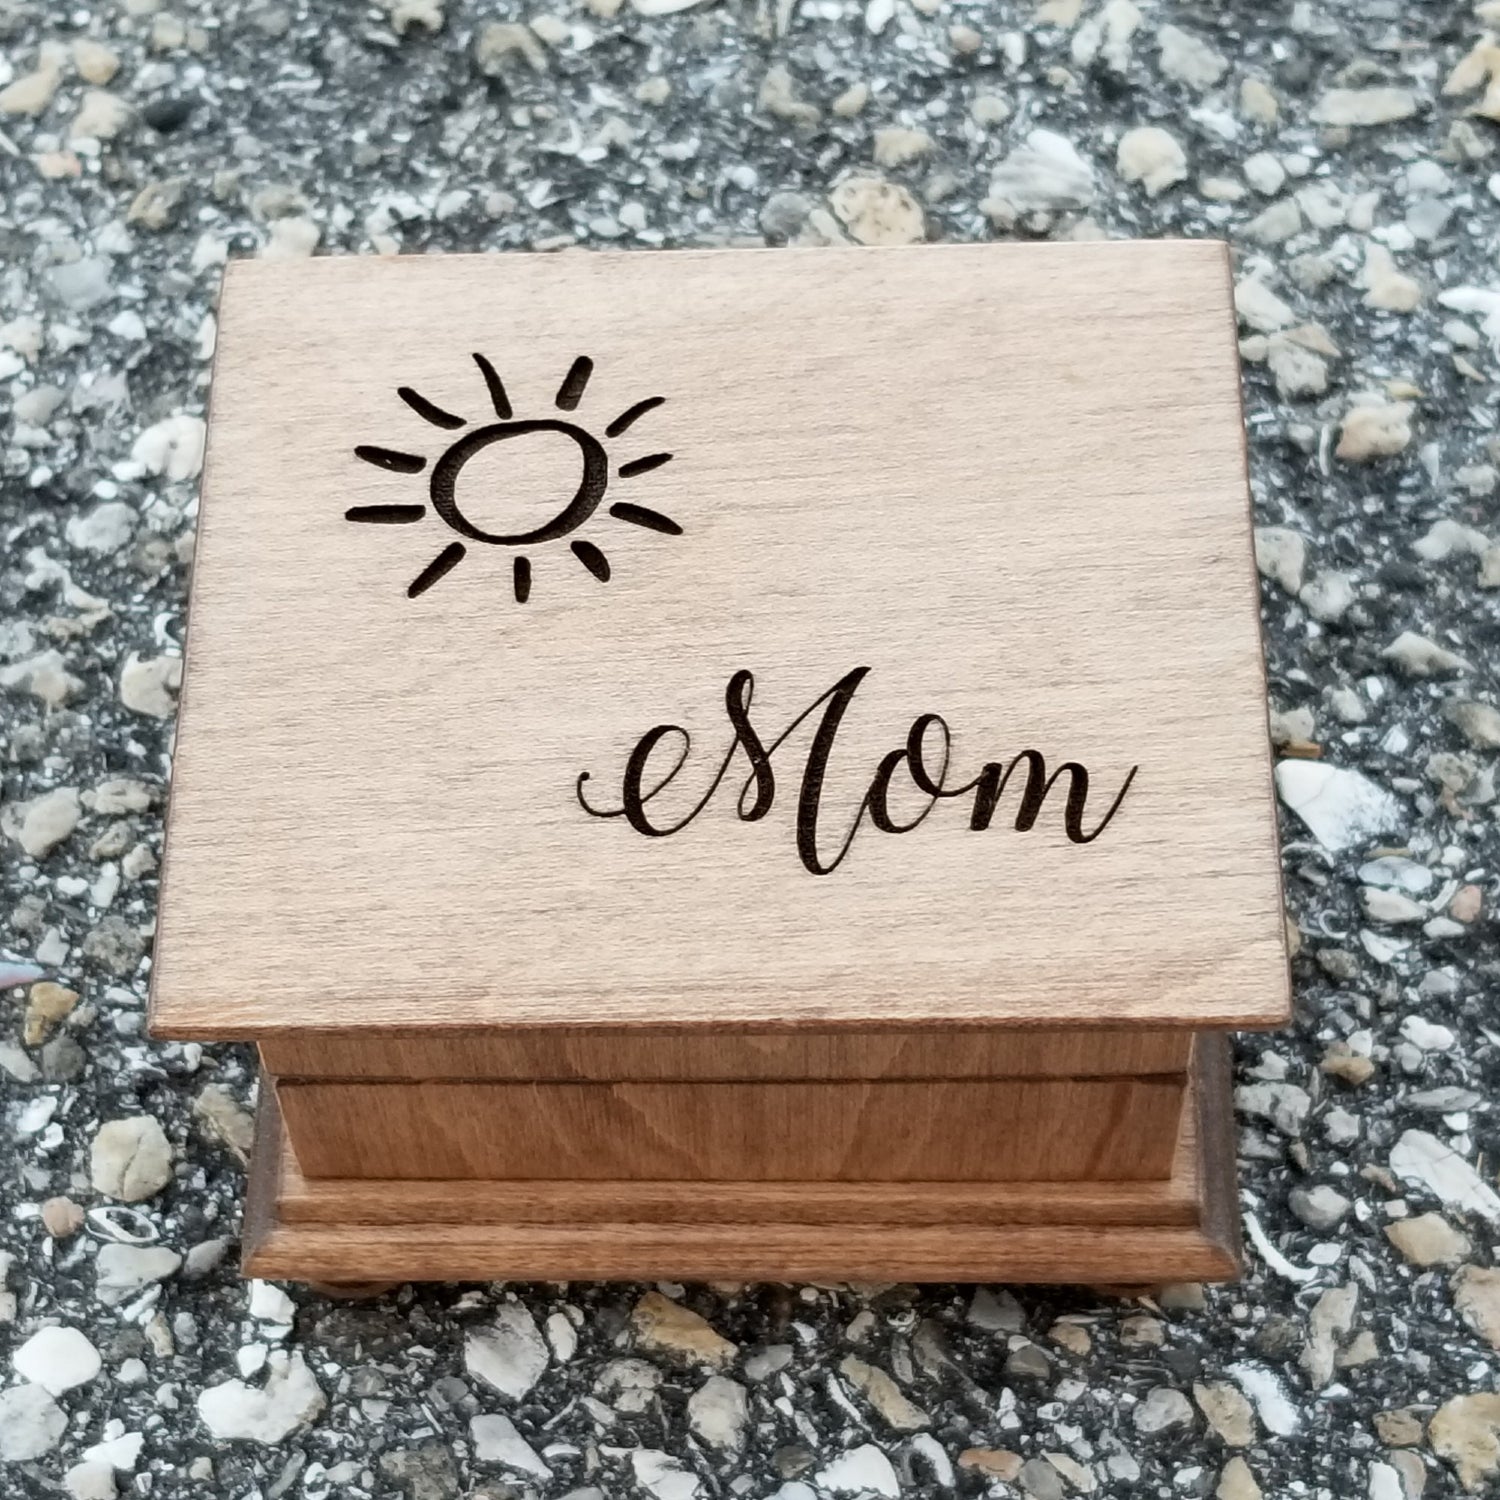 Mom gift box, Engraved music box with Mom and a sun drawing engraved on the top